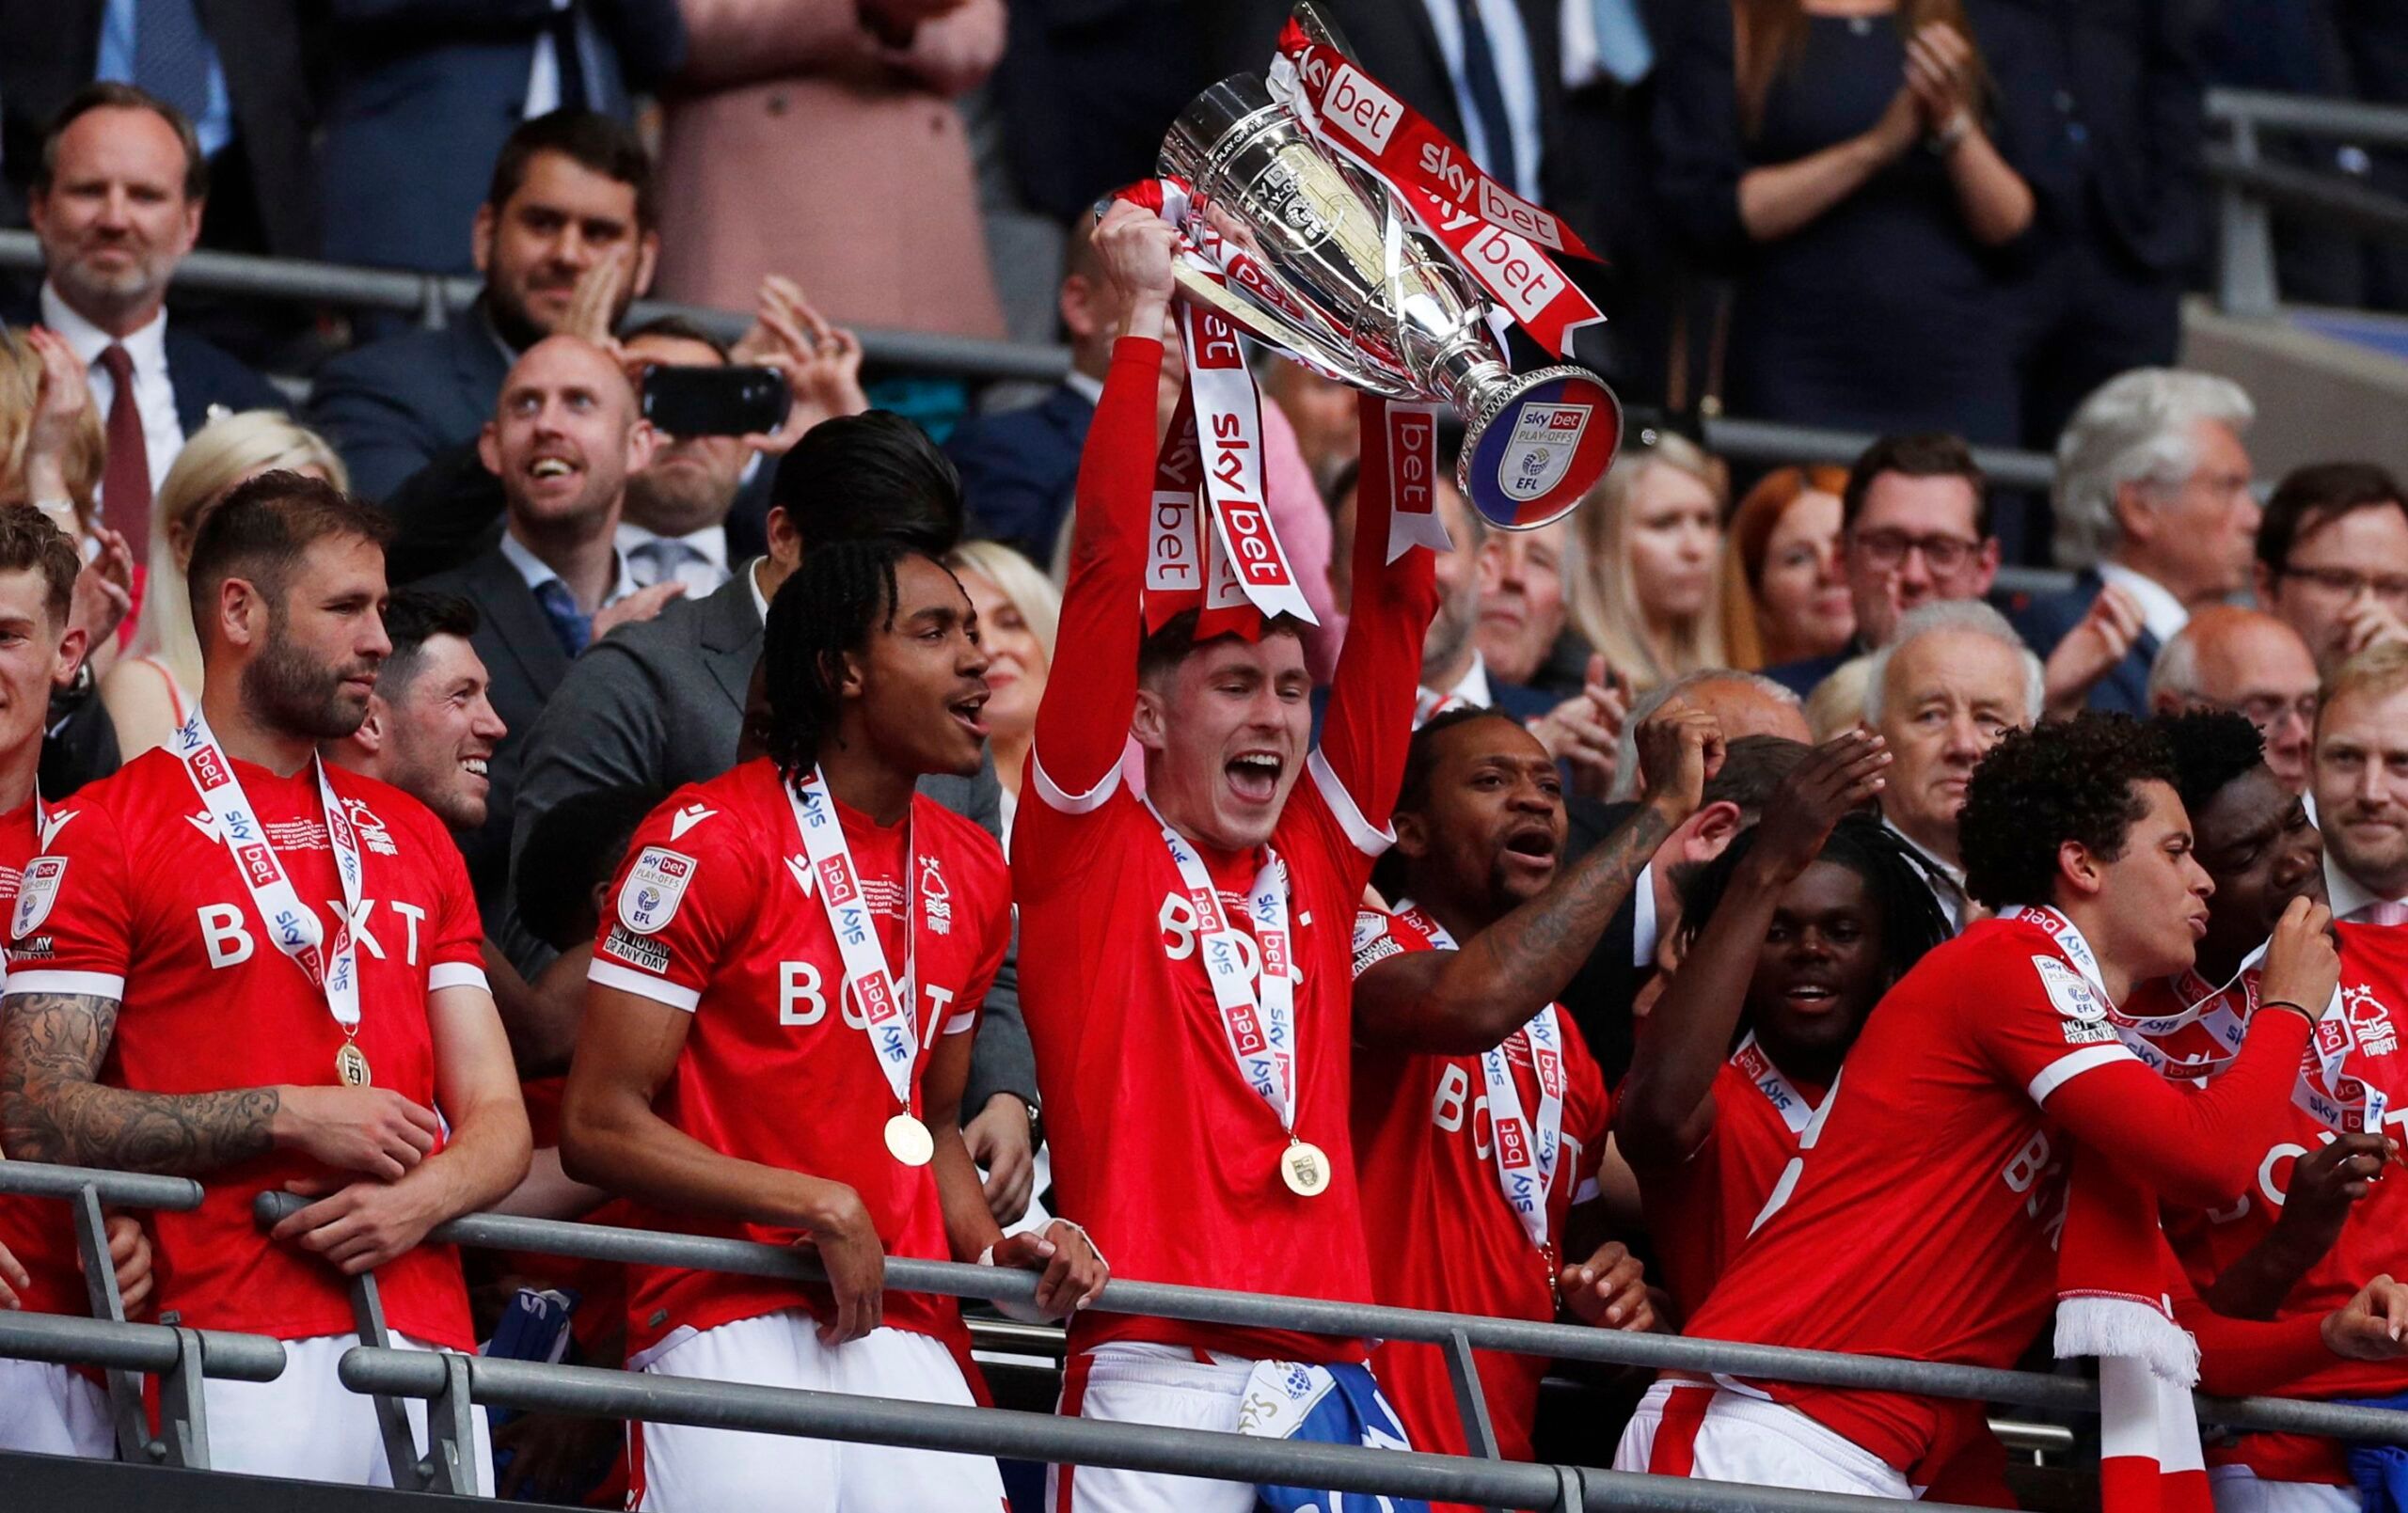 Soccer Football - Championship Play-Off Final - Huddersfield Town v Nottingham Forest - Wembley Stadium, London, Britain - May 29, 2022 Nottingham Forest's James Garner celebrates with the trophy after winning the Championship Play-Off Final Action Images via Reuters/Andrew Boyers